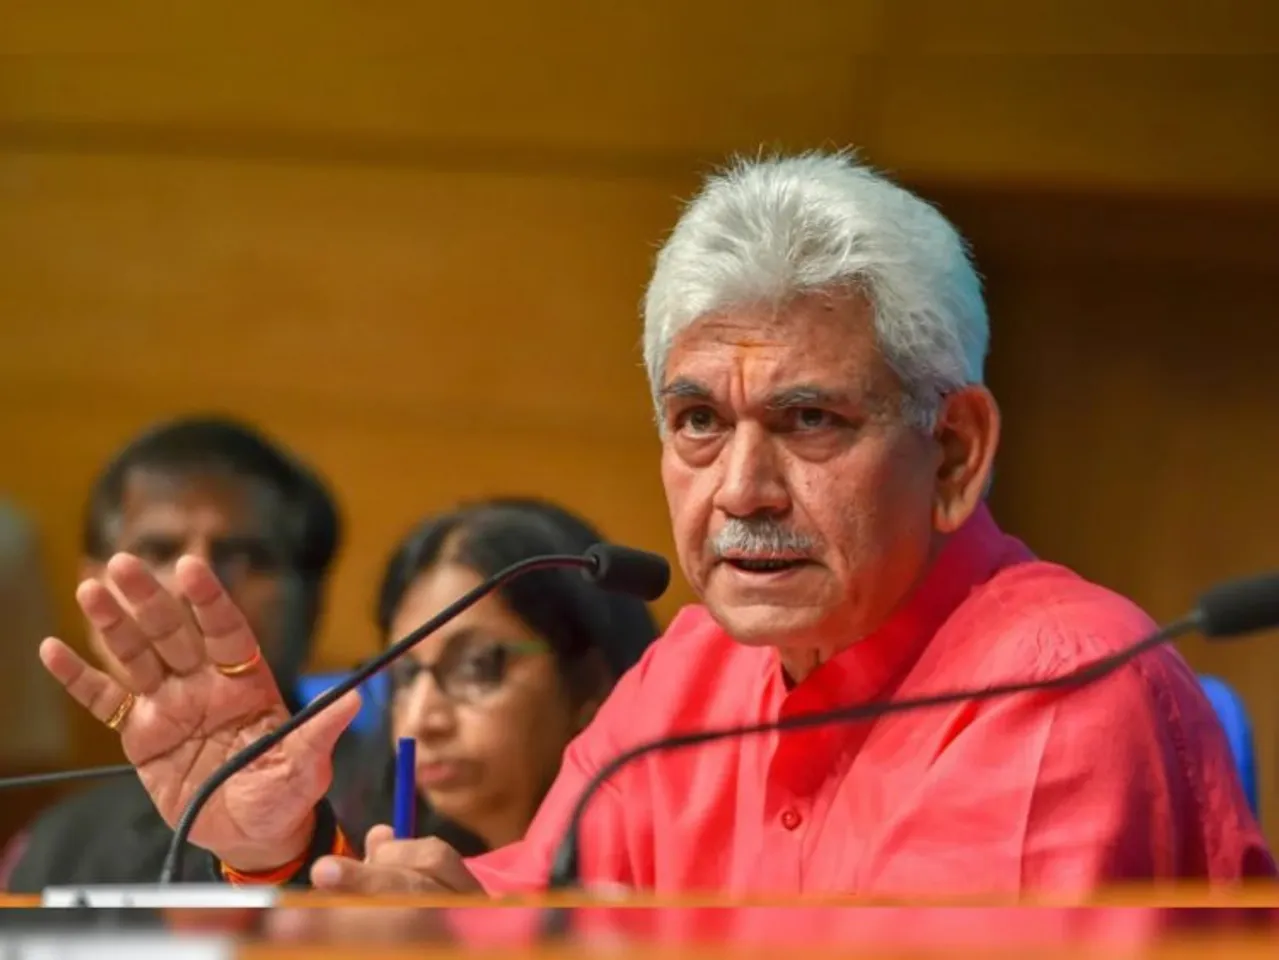 Elections in Jammu & Kashmir post electoral roll revision, decision on statehood later: LG Manoj Sinha